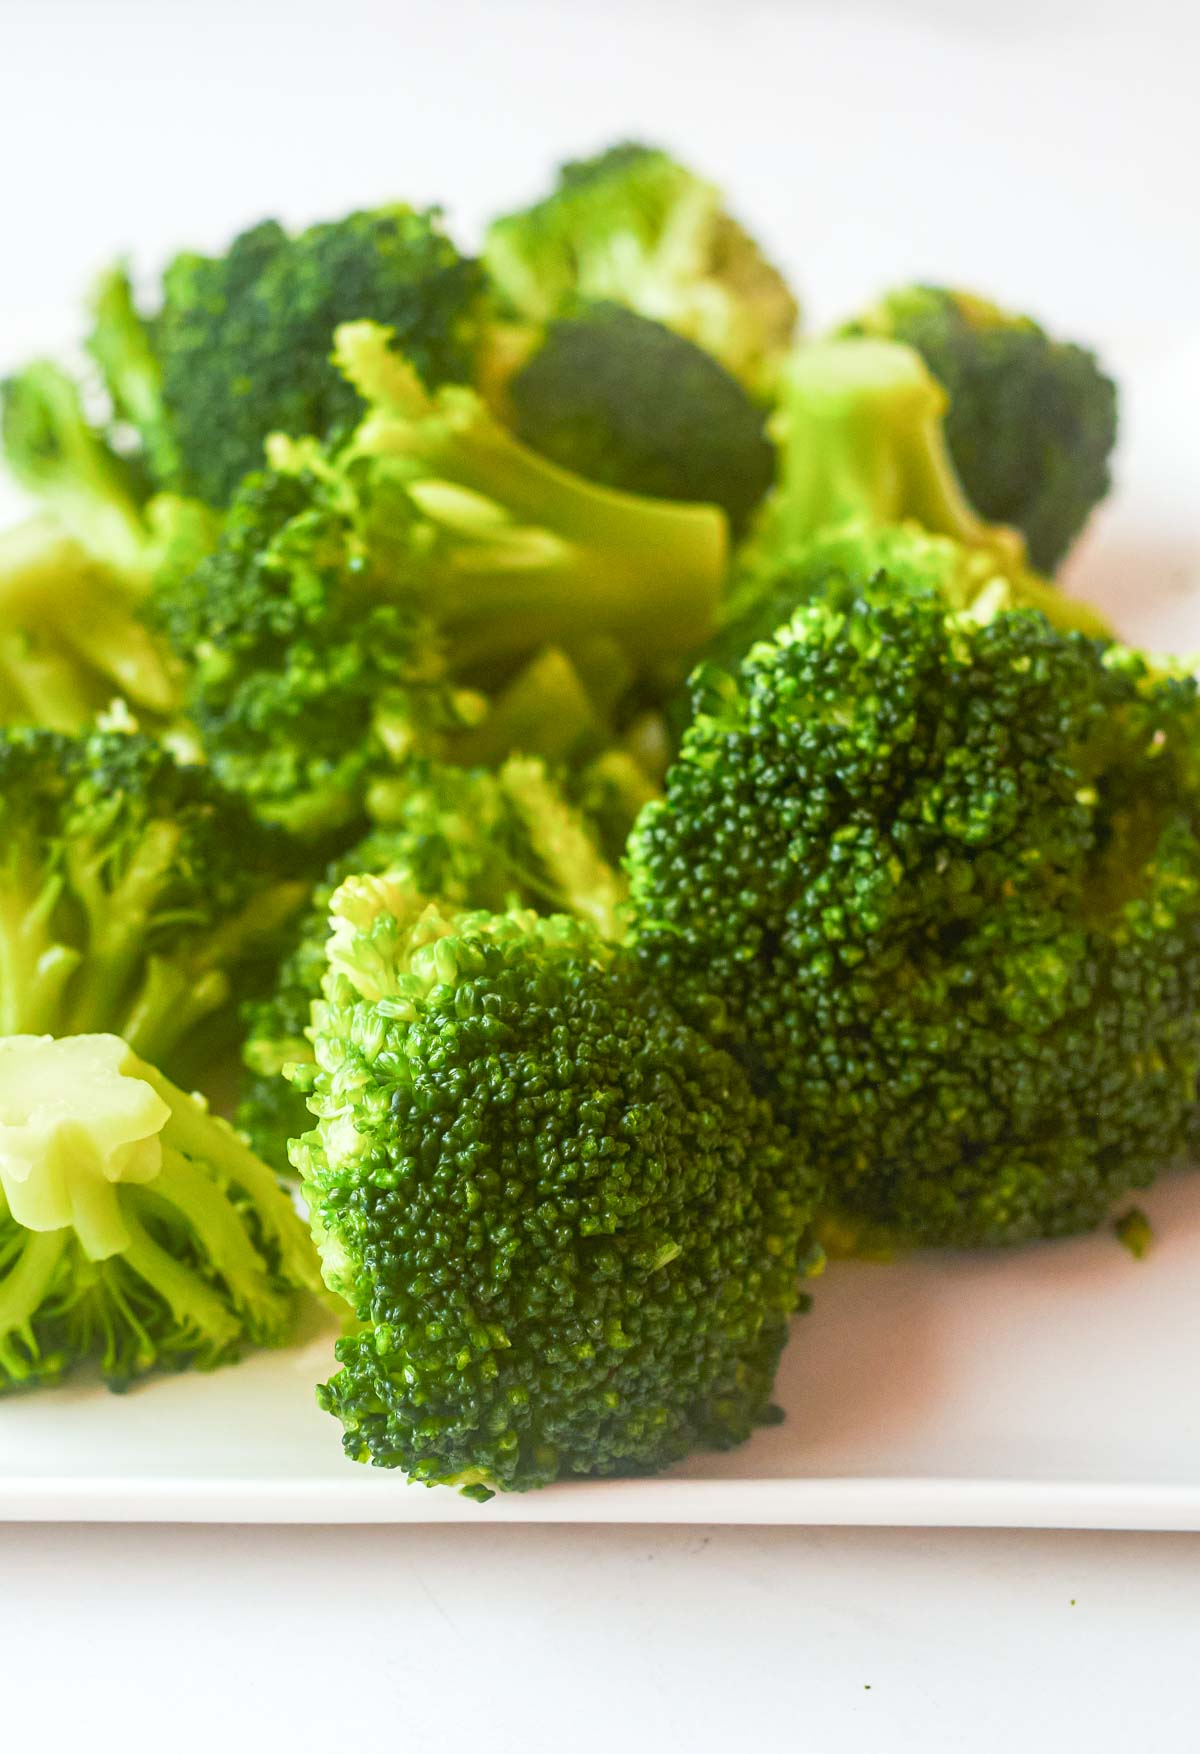 learn how to boil broccoli that turns out crisp tender as shown on this plate